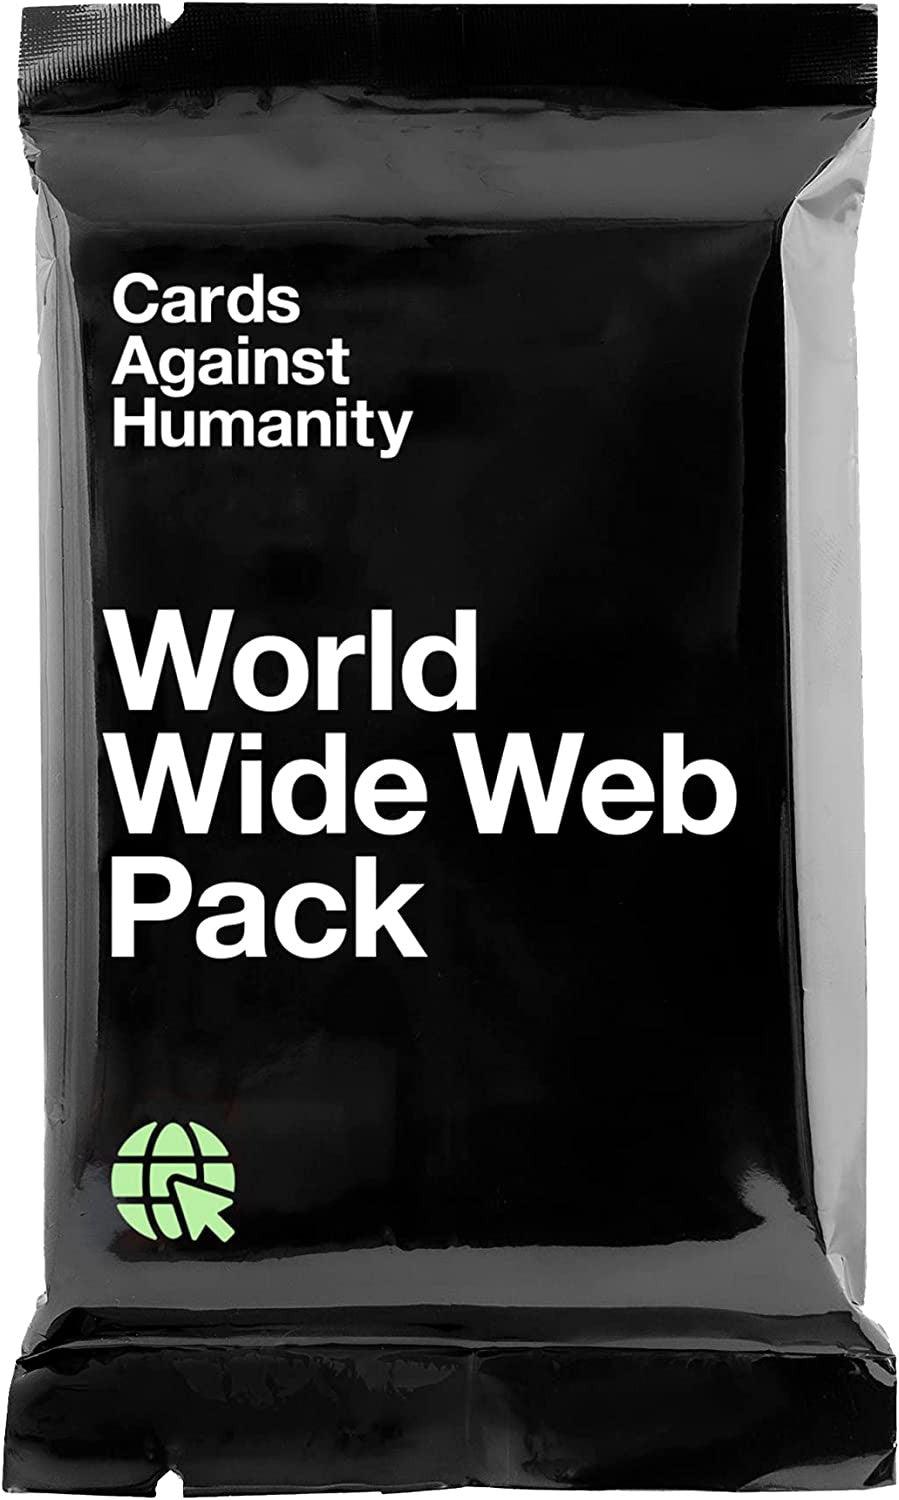 VR-28344 Cards Against Humanity WWW Pack (Do not sell on online marketplaces) - Cards Against Humanity - Titan Pop Culture